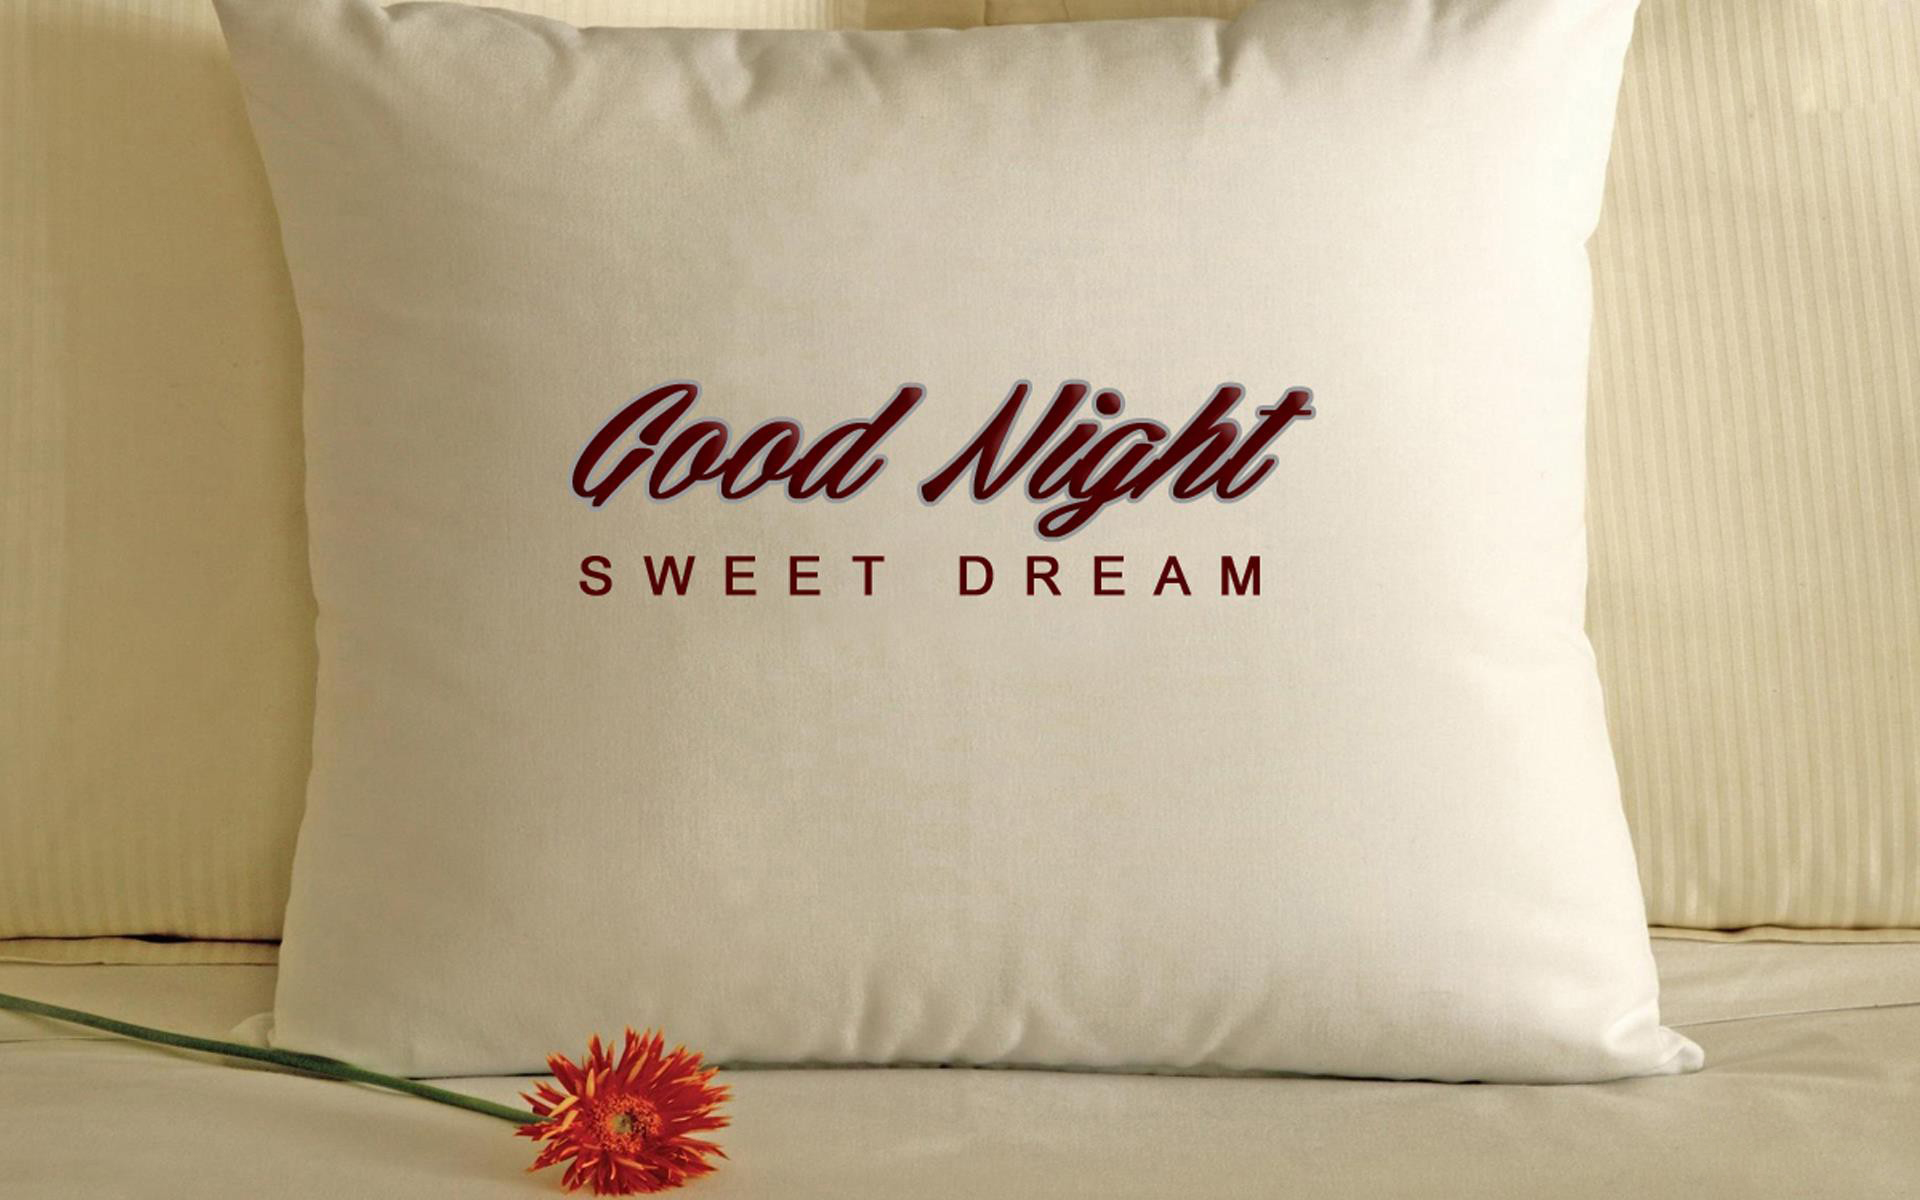 Good Night Sweet Dream Wallpapers And Backgrounds - Whatsapp Good Night Messages Download - HD Wallpaper 